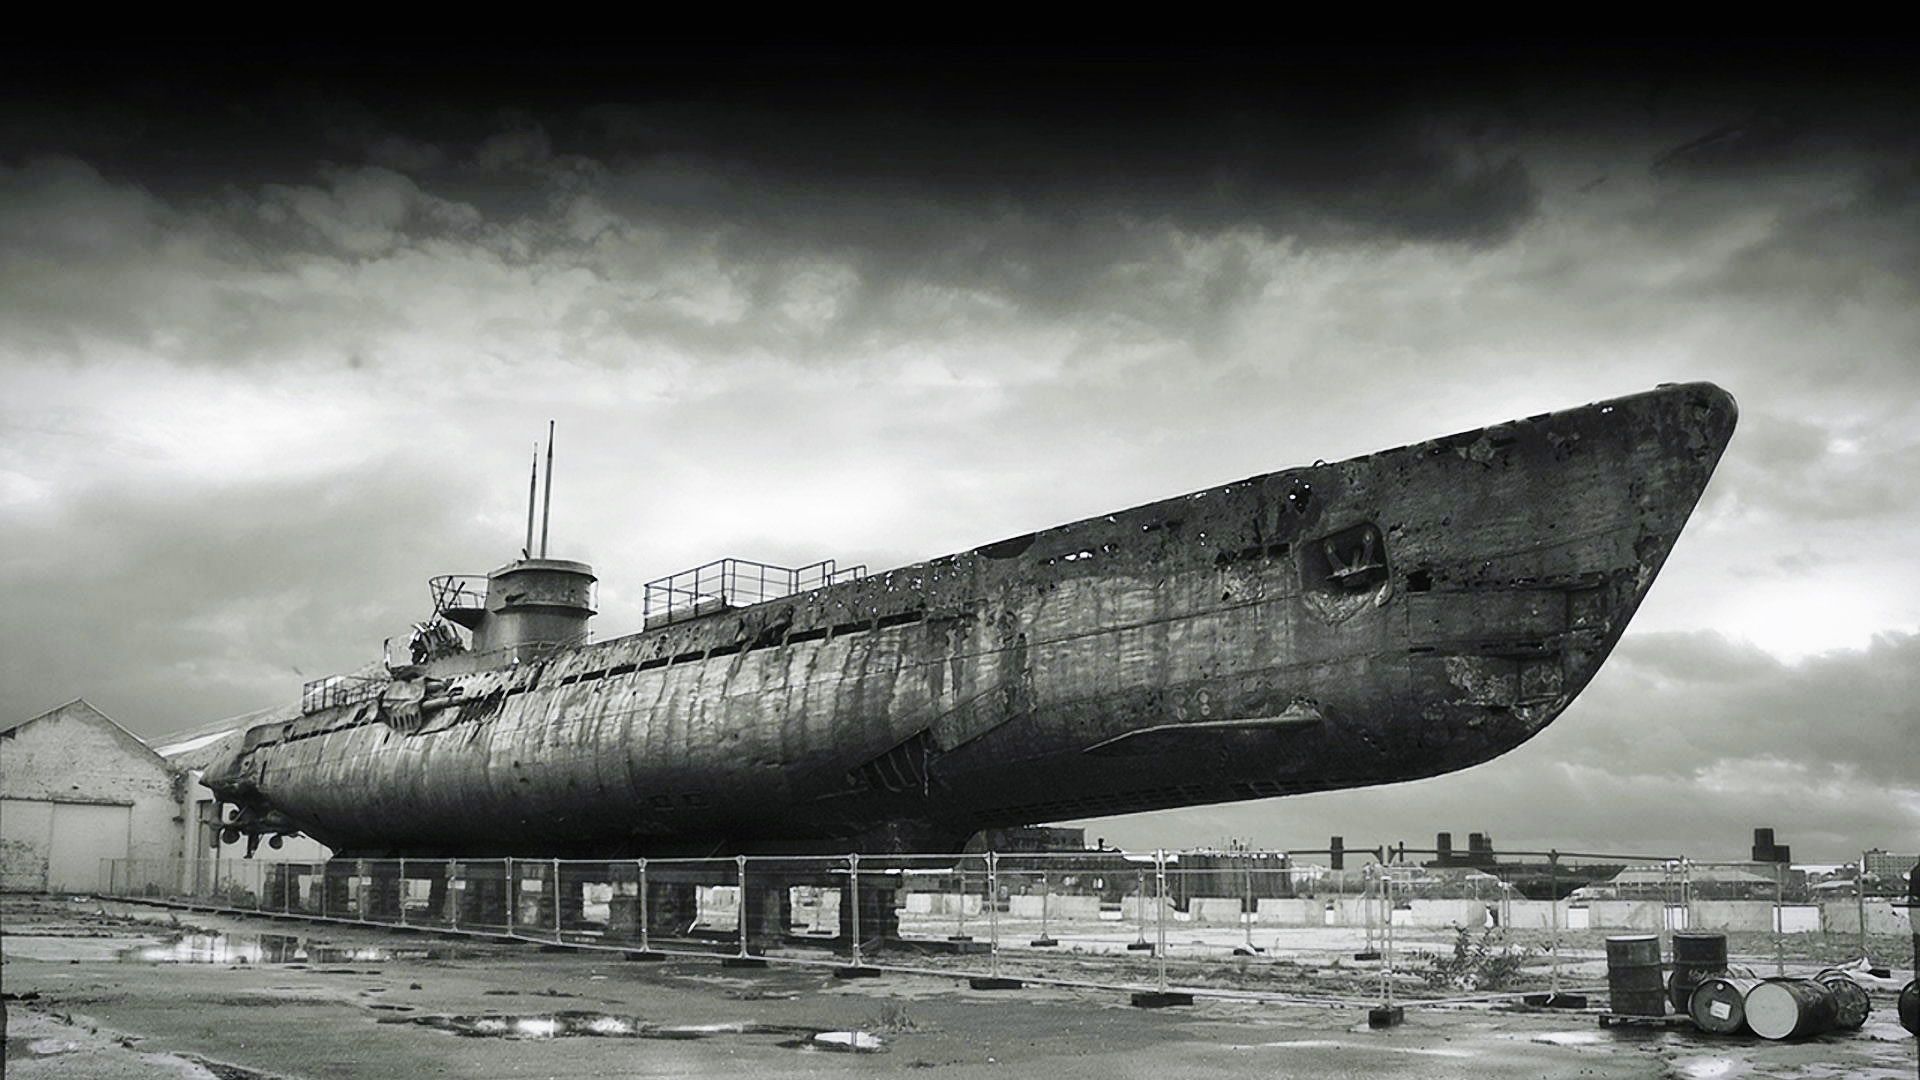 Abandoned Submarines - HD Wallpapers Widescreen - 1920x1080